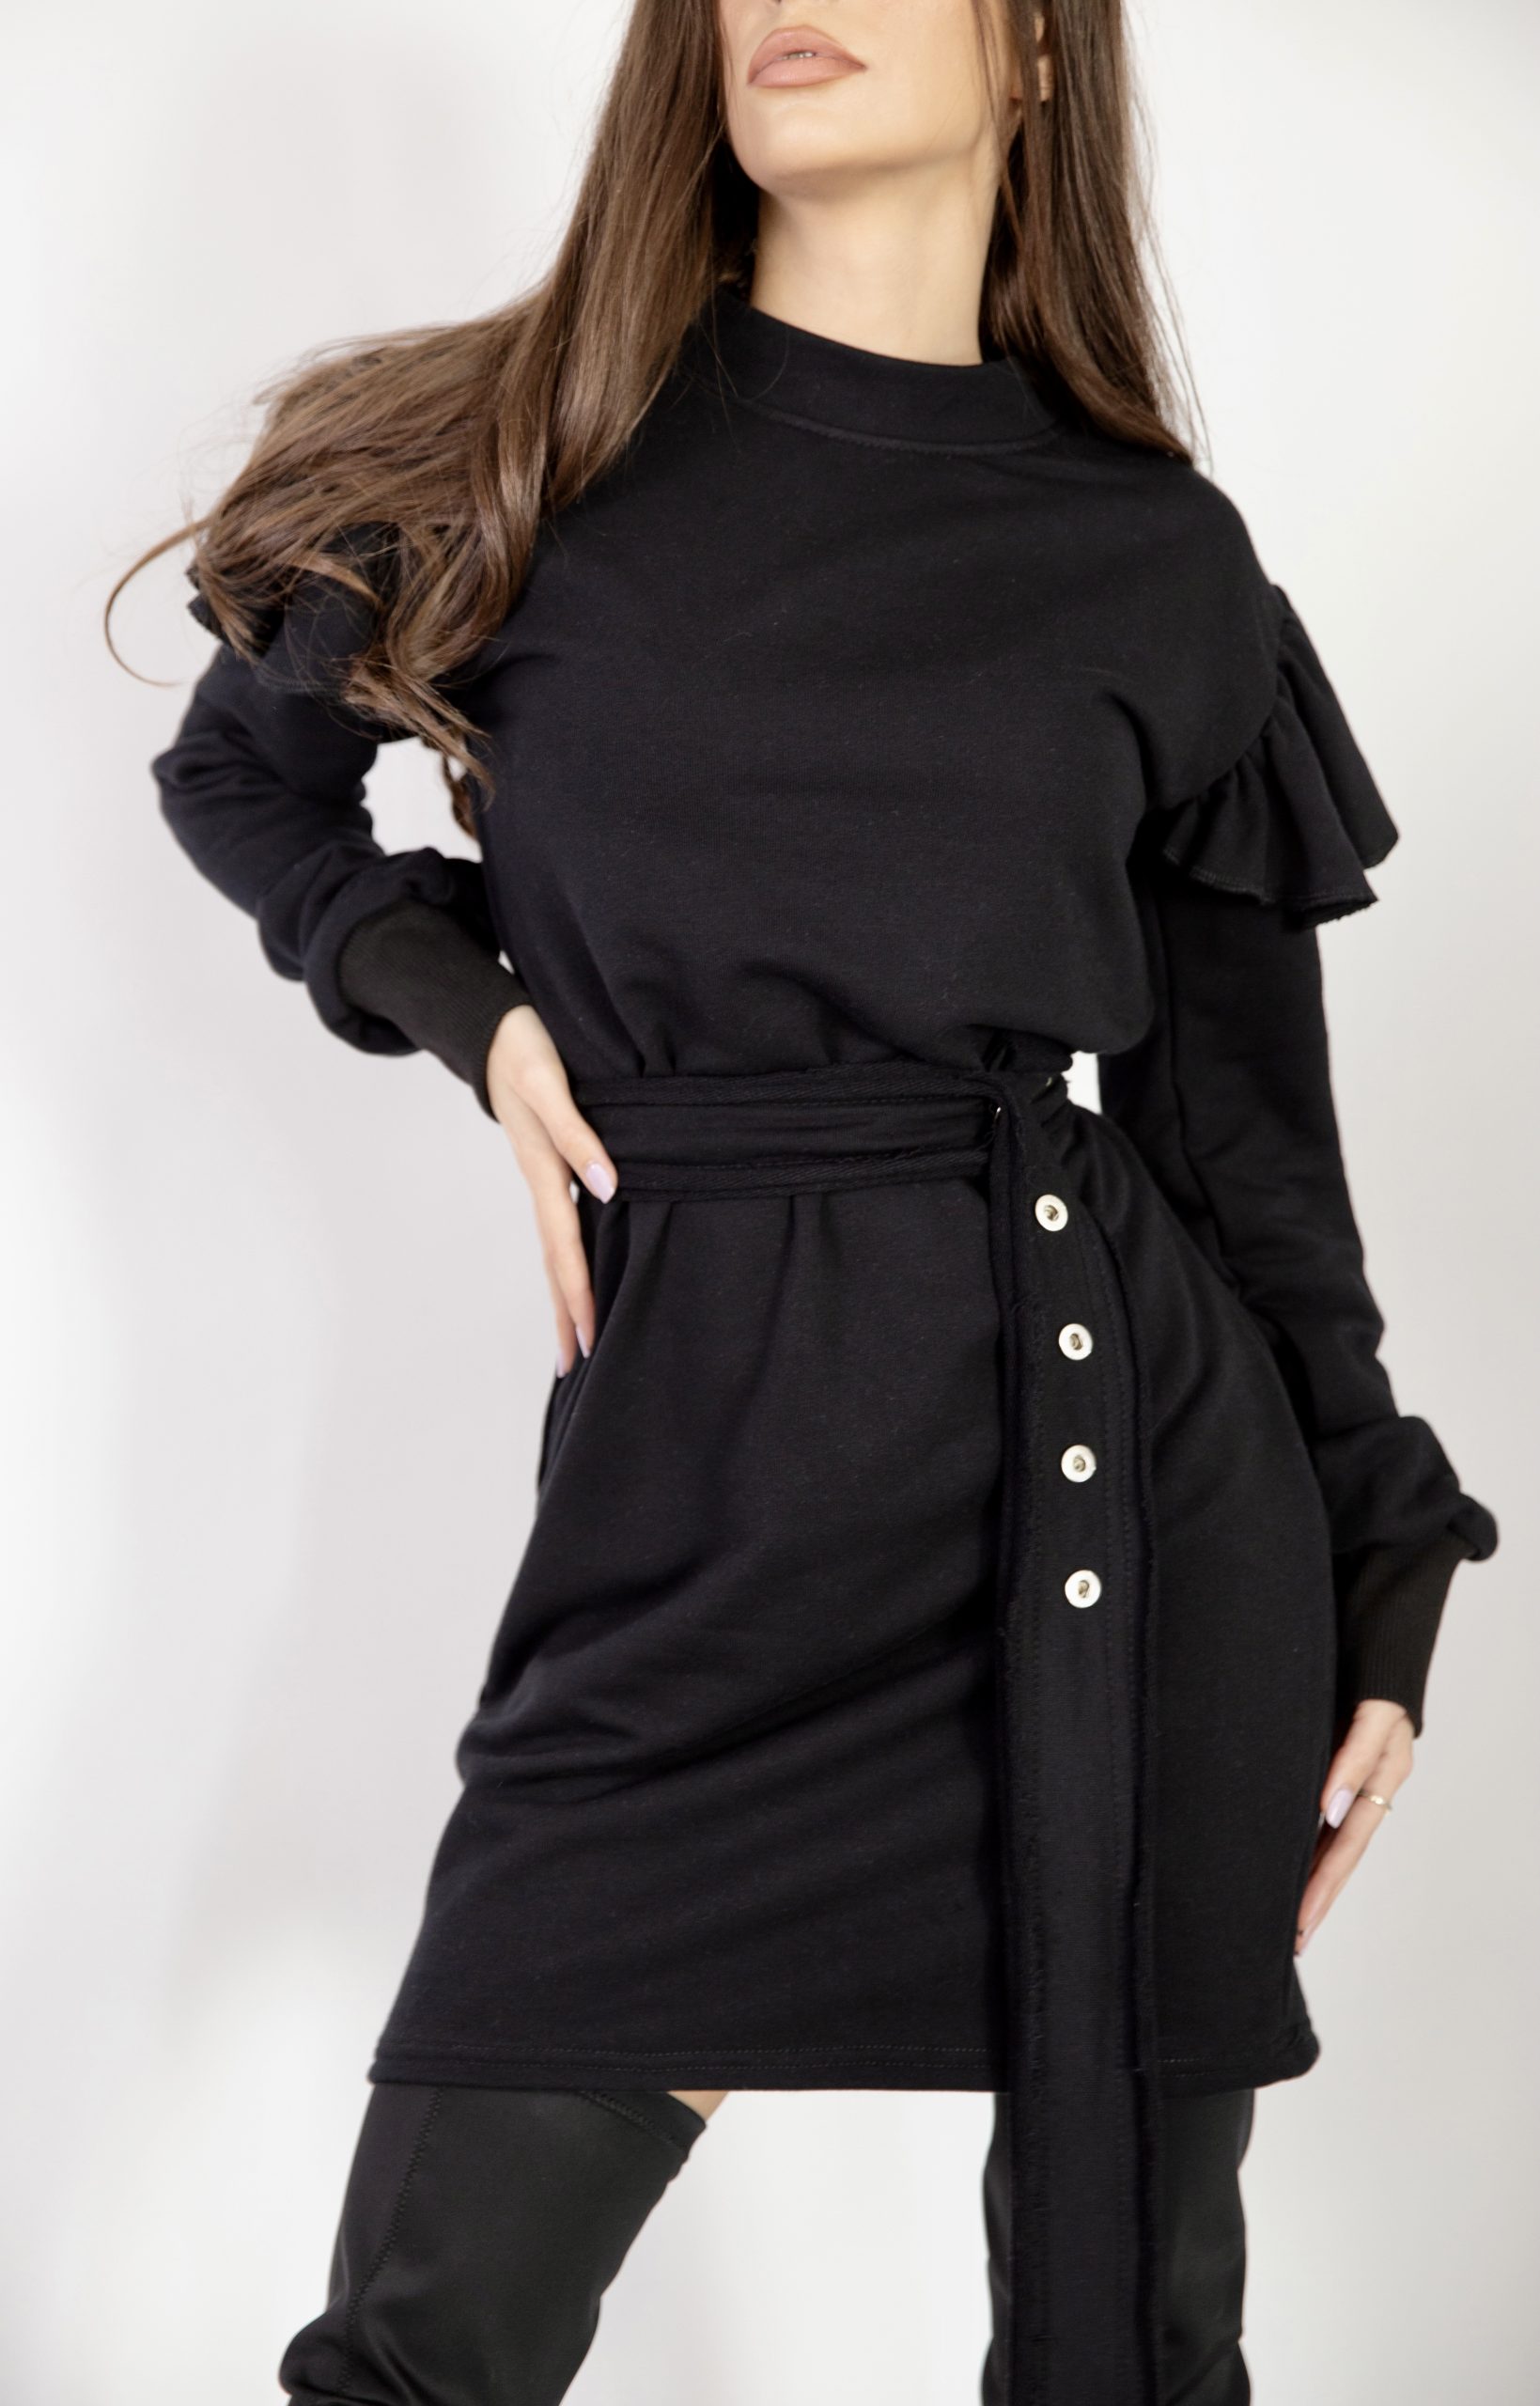 Black dress with Ruffles and Belt